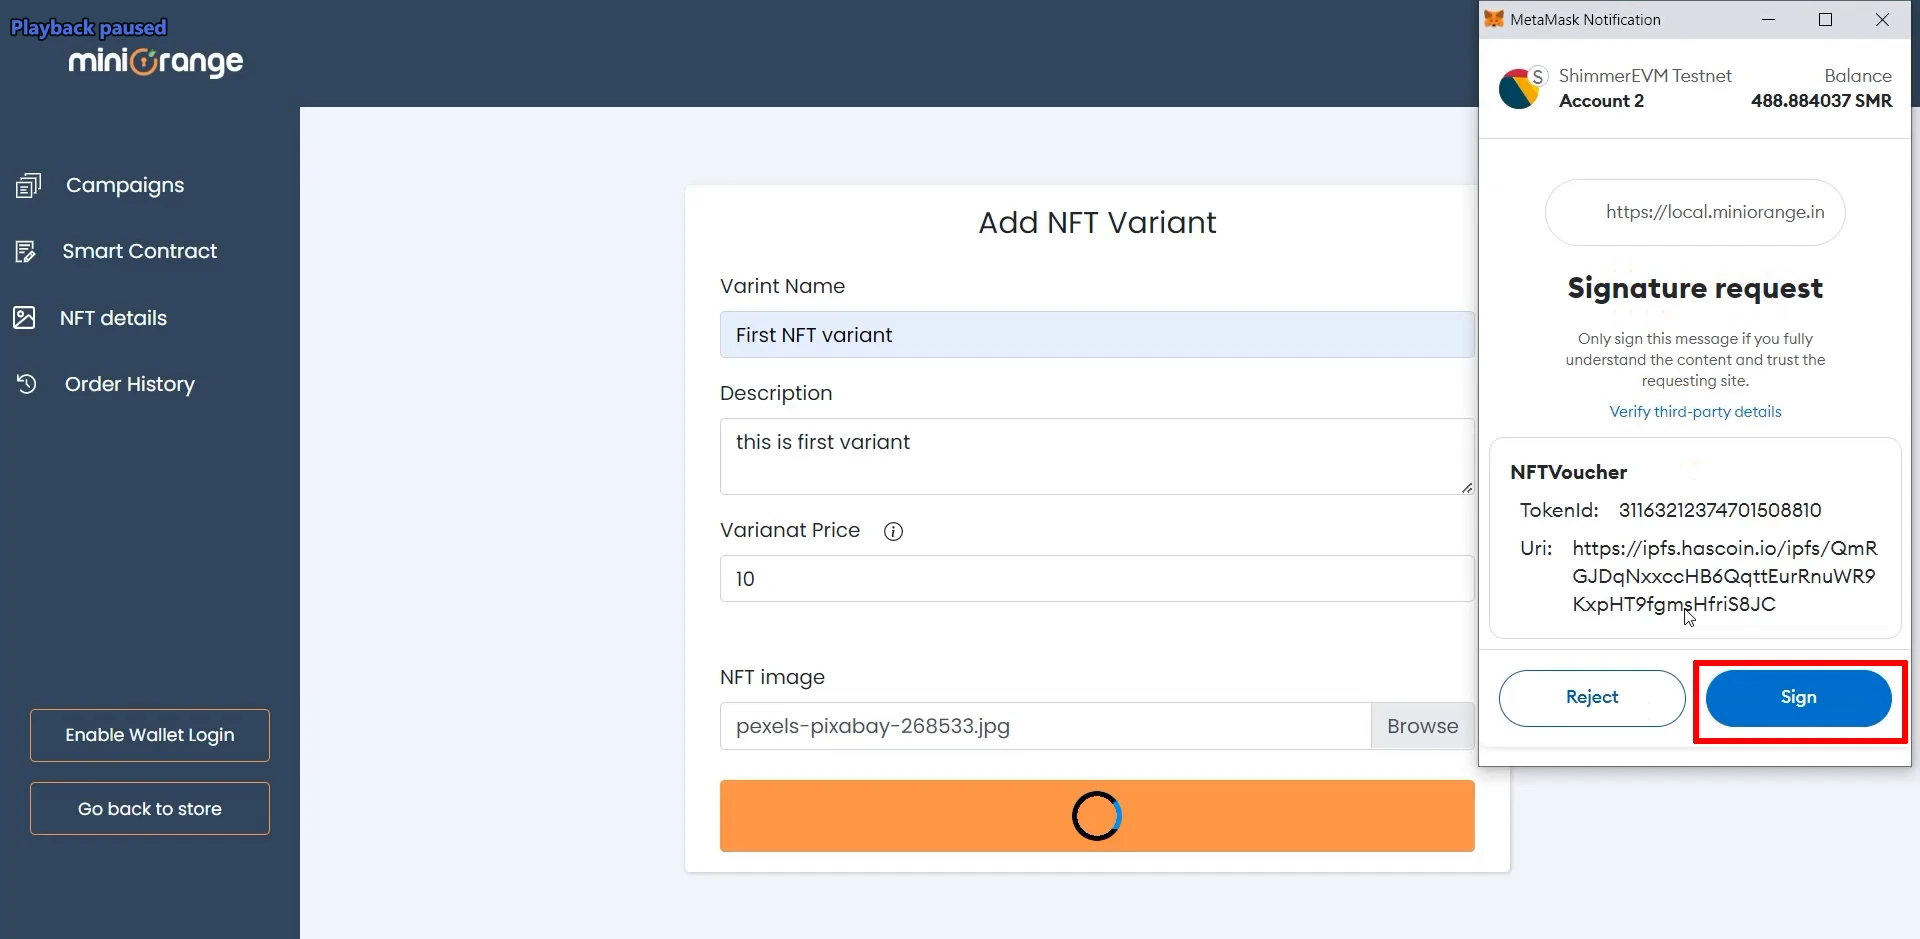 Sell NFT on Shopify - How to sell NFT on Shopify Store - Validate NFT Variant